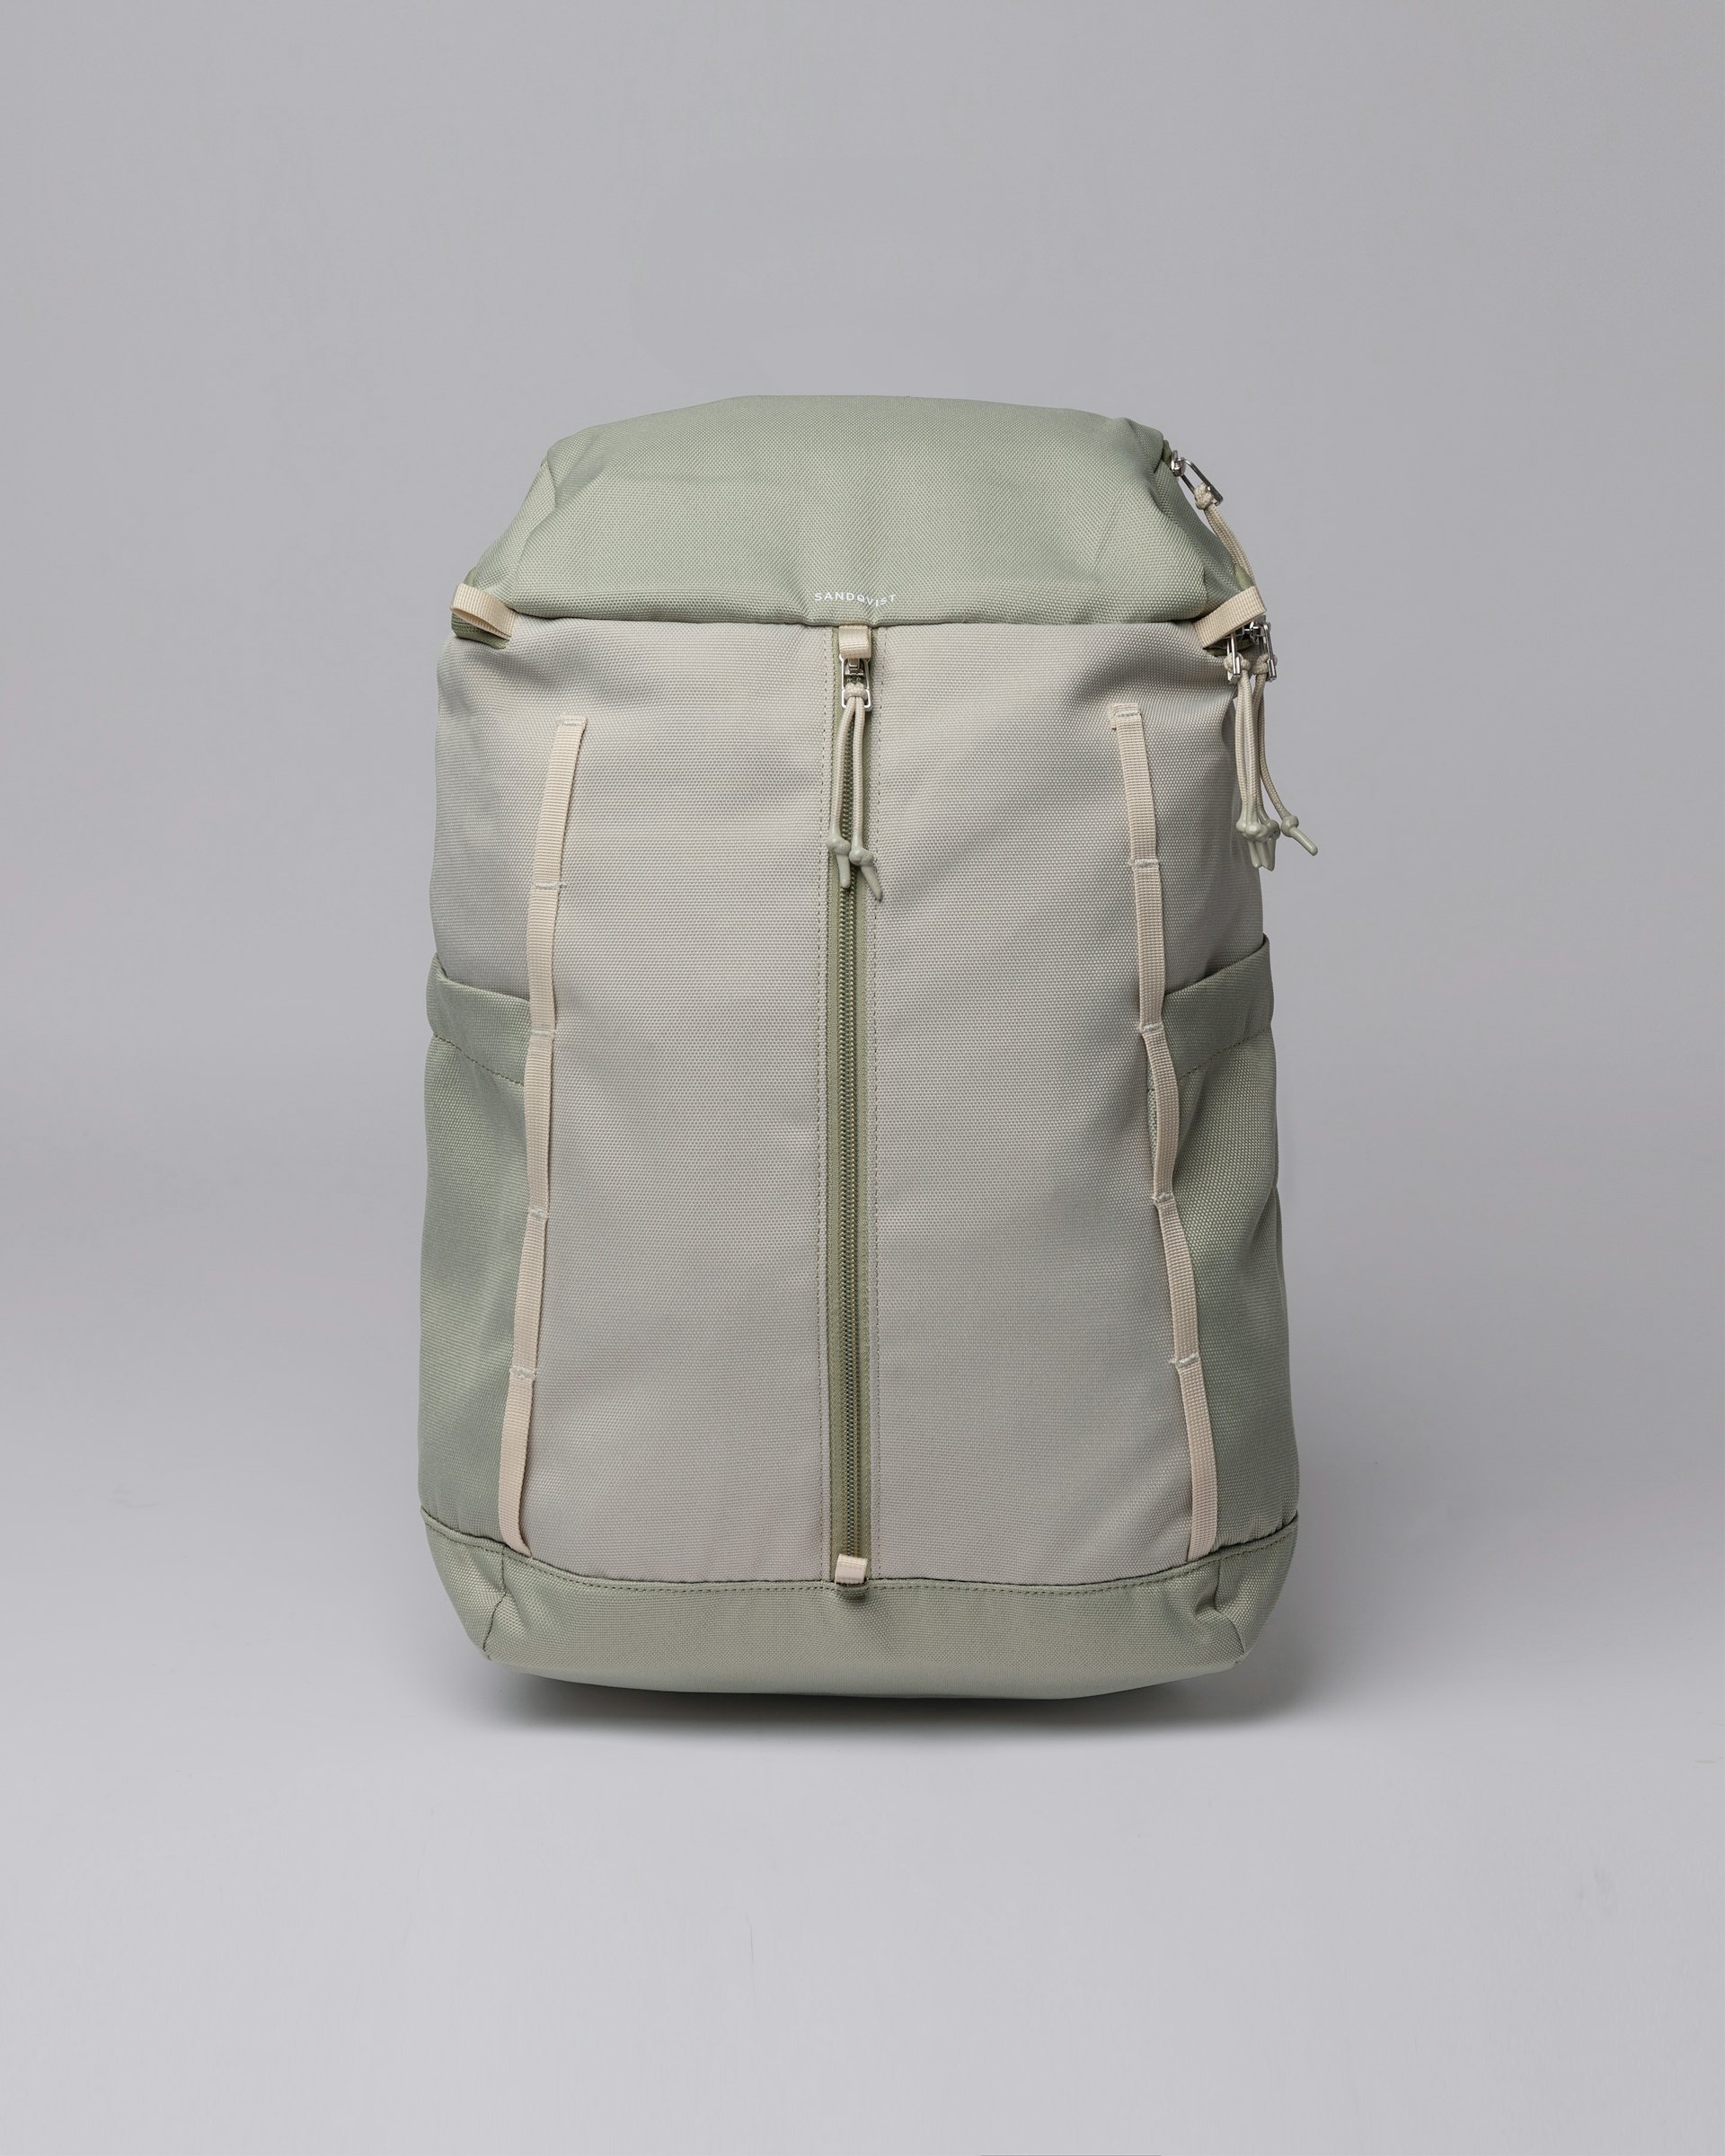 Sune belongs to the category Backpacks and is in color pale birch light